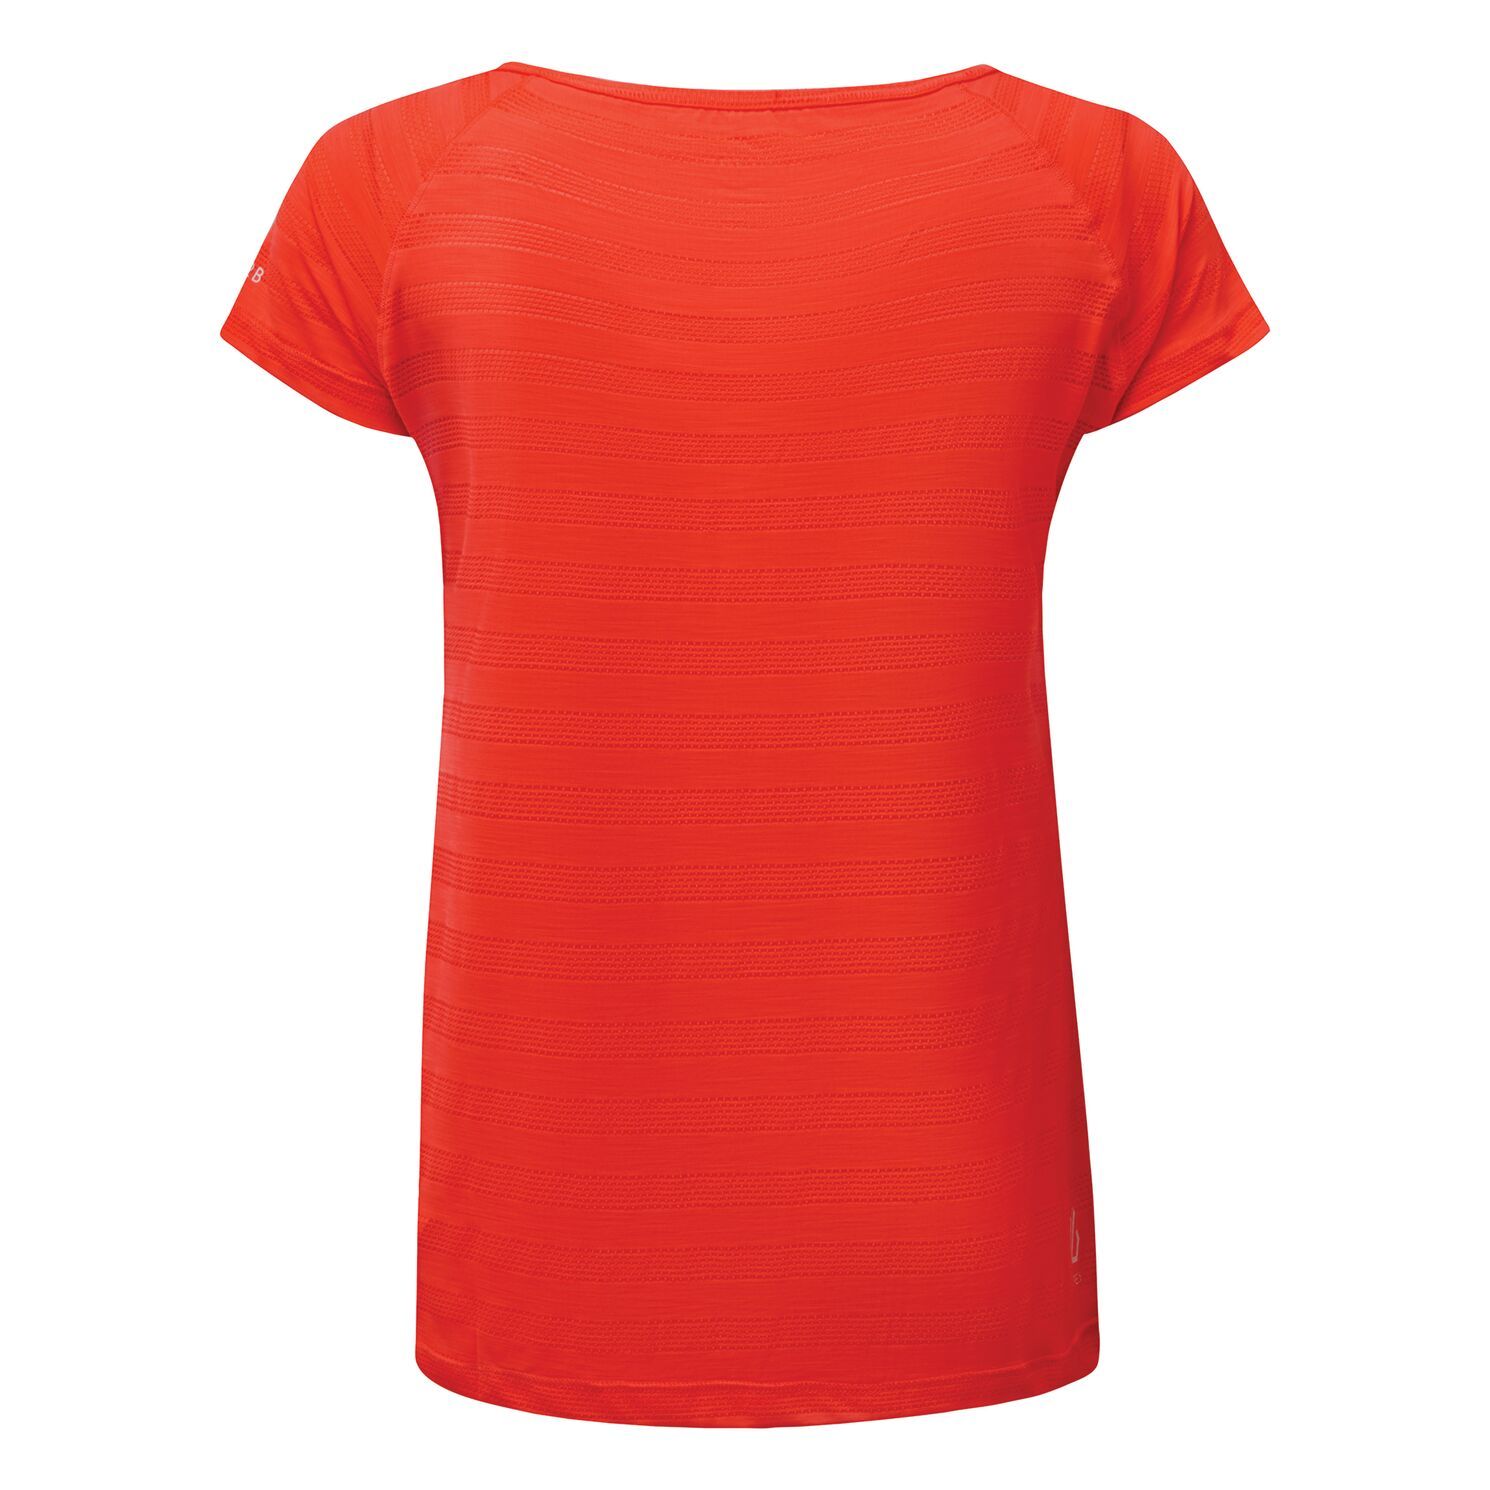 Material: 100% Polyester (Q-Wic lightweight polyester fabric). Slim fit, soft and stretchy short sleeved work out shirt with breathable mesh detailing and scooped neckline. Built in anti-bacterial odour control and motion-friendly sleeve design. Features a small Dare 2B logo.